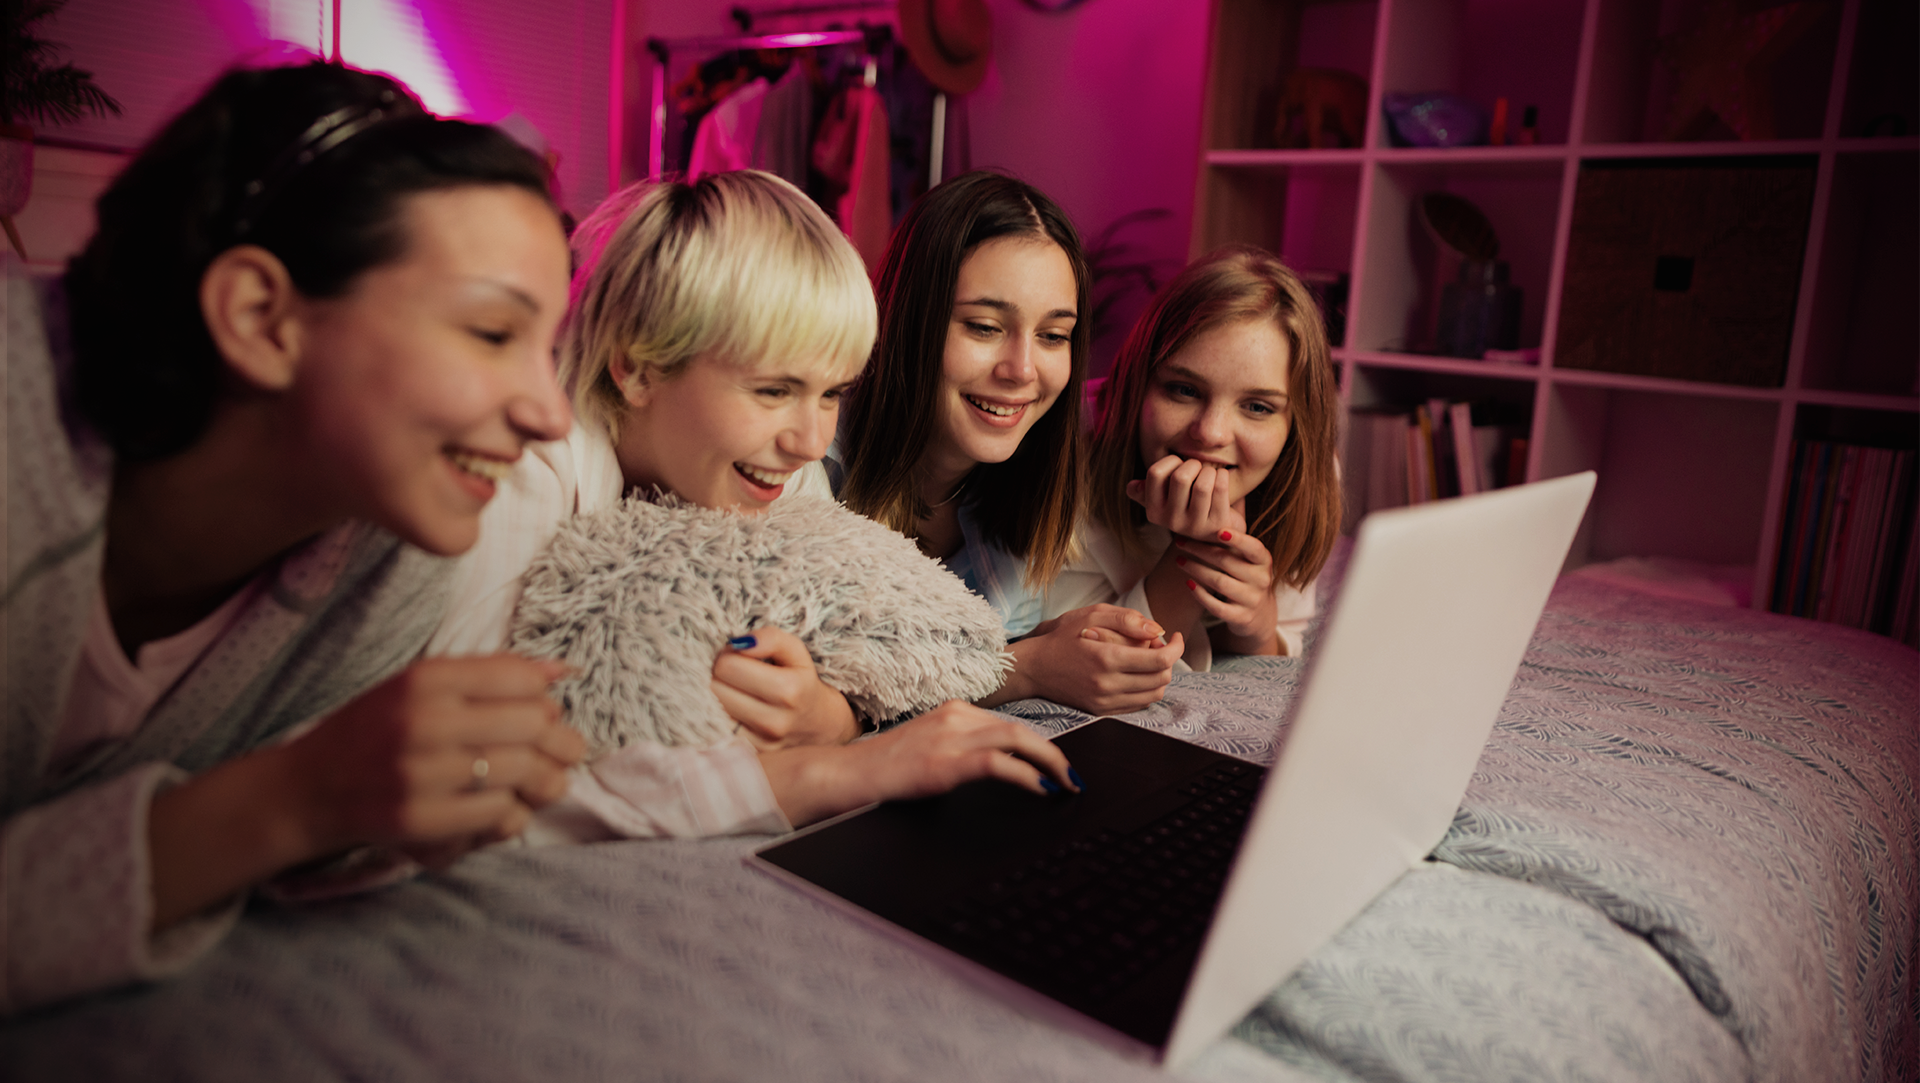 The image shows four female students watching a laptop together.